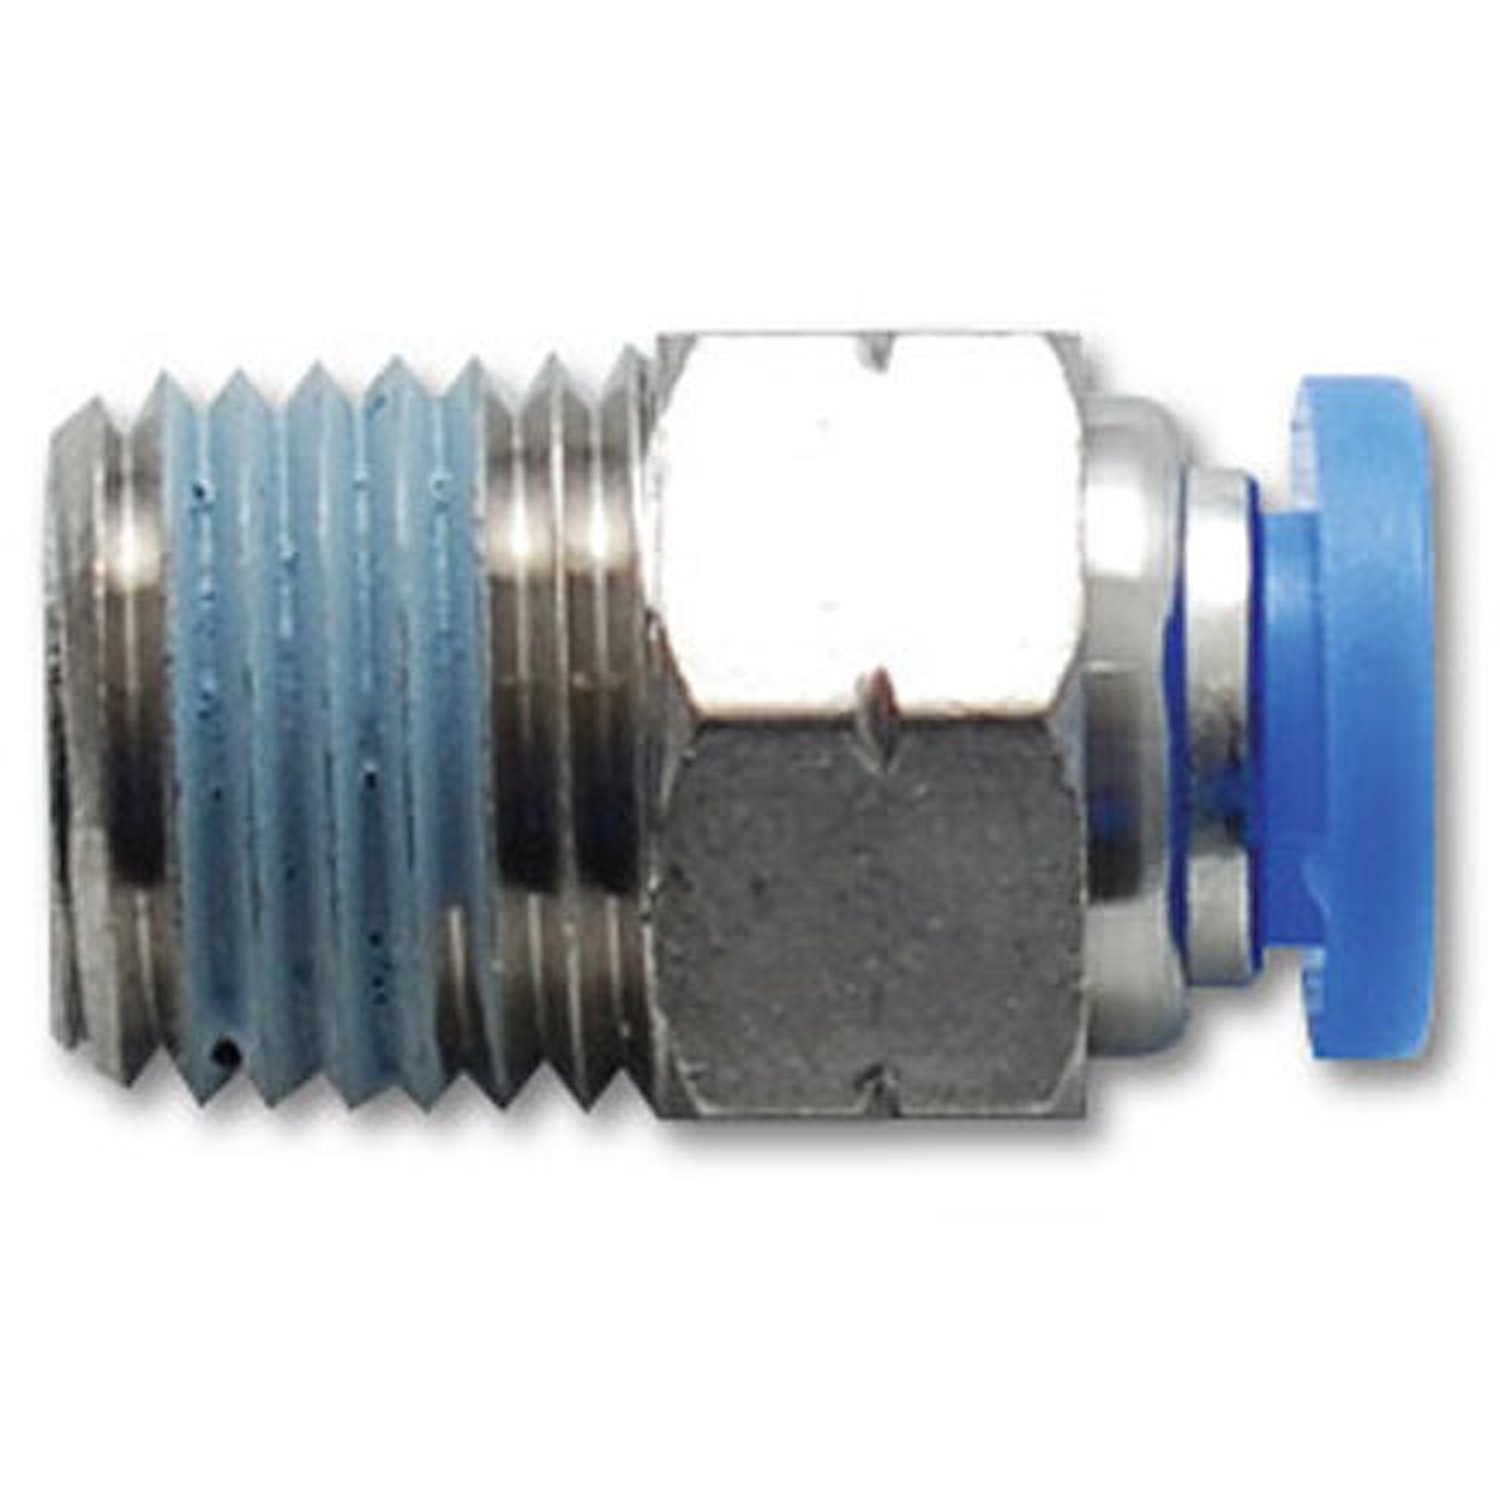 Male Straight One-Touch Fitting 1/8" NPT Thread